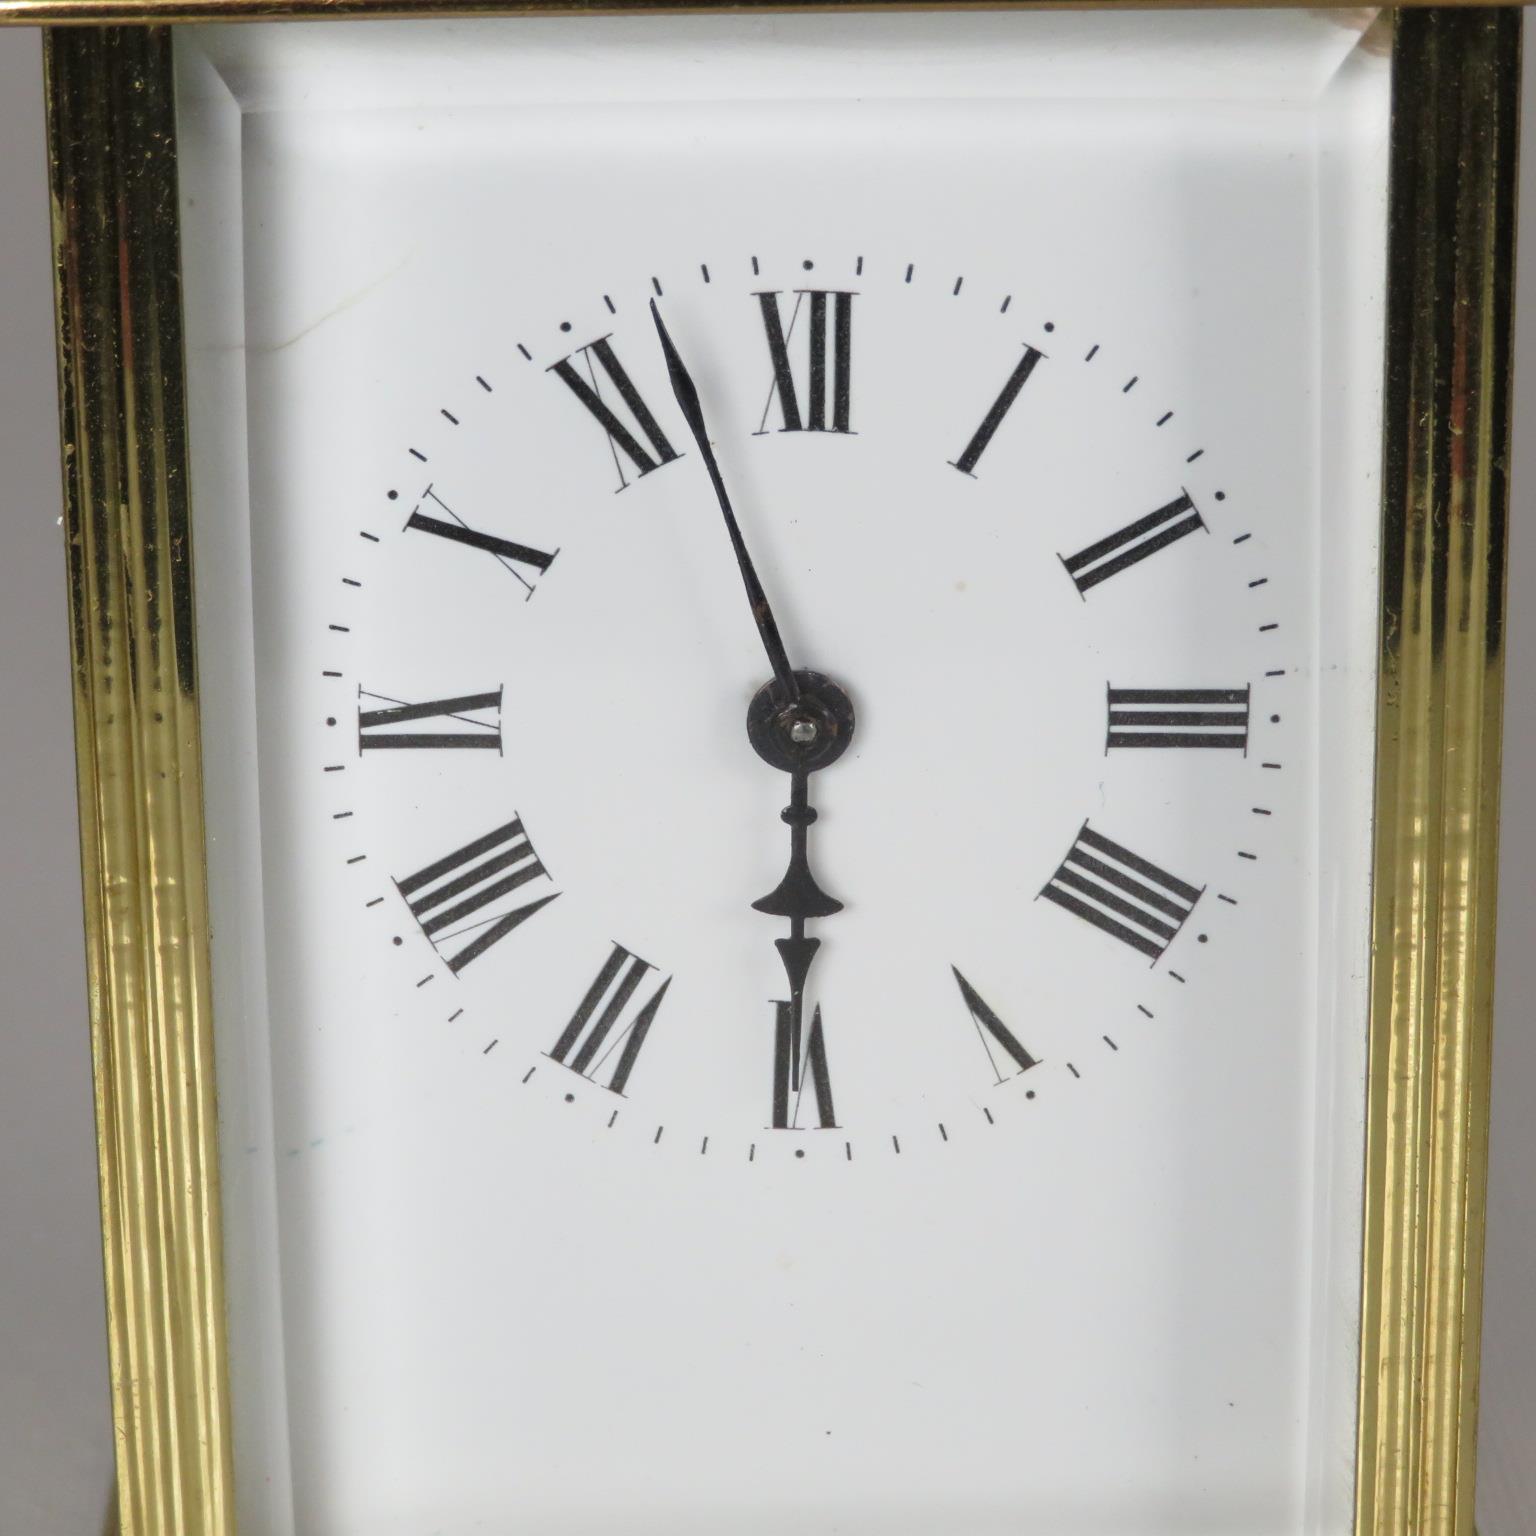 A midsize carriage clock 130mm x 70mm. Fully running // - Image 2 of 6